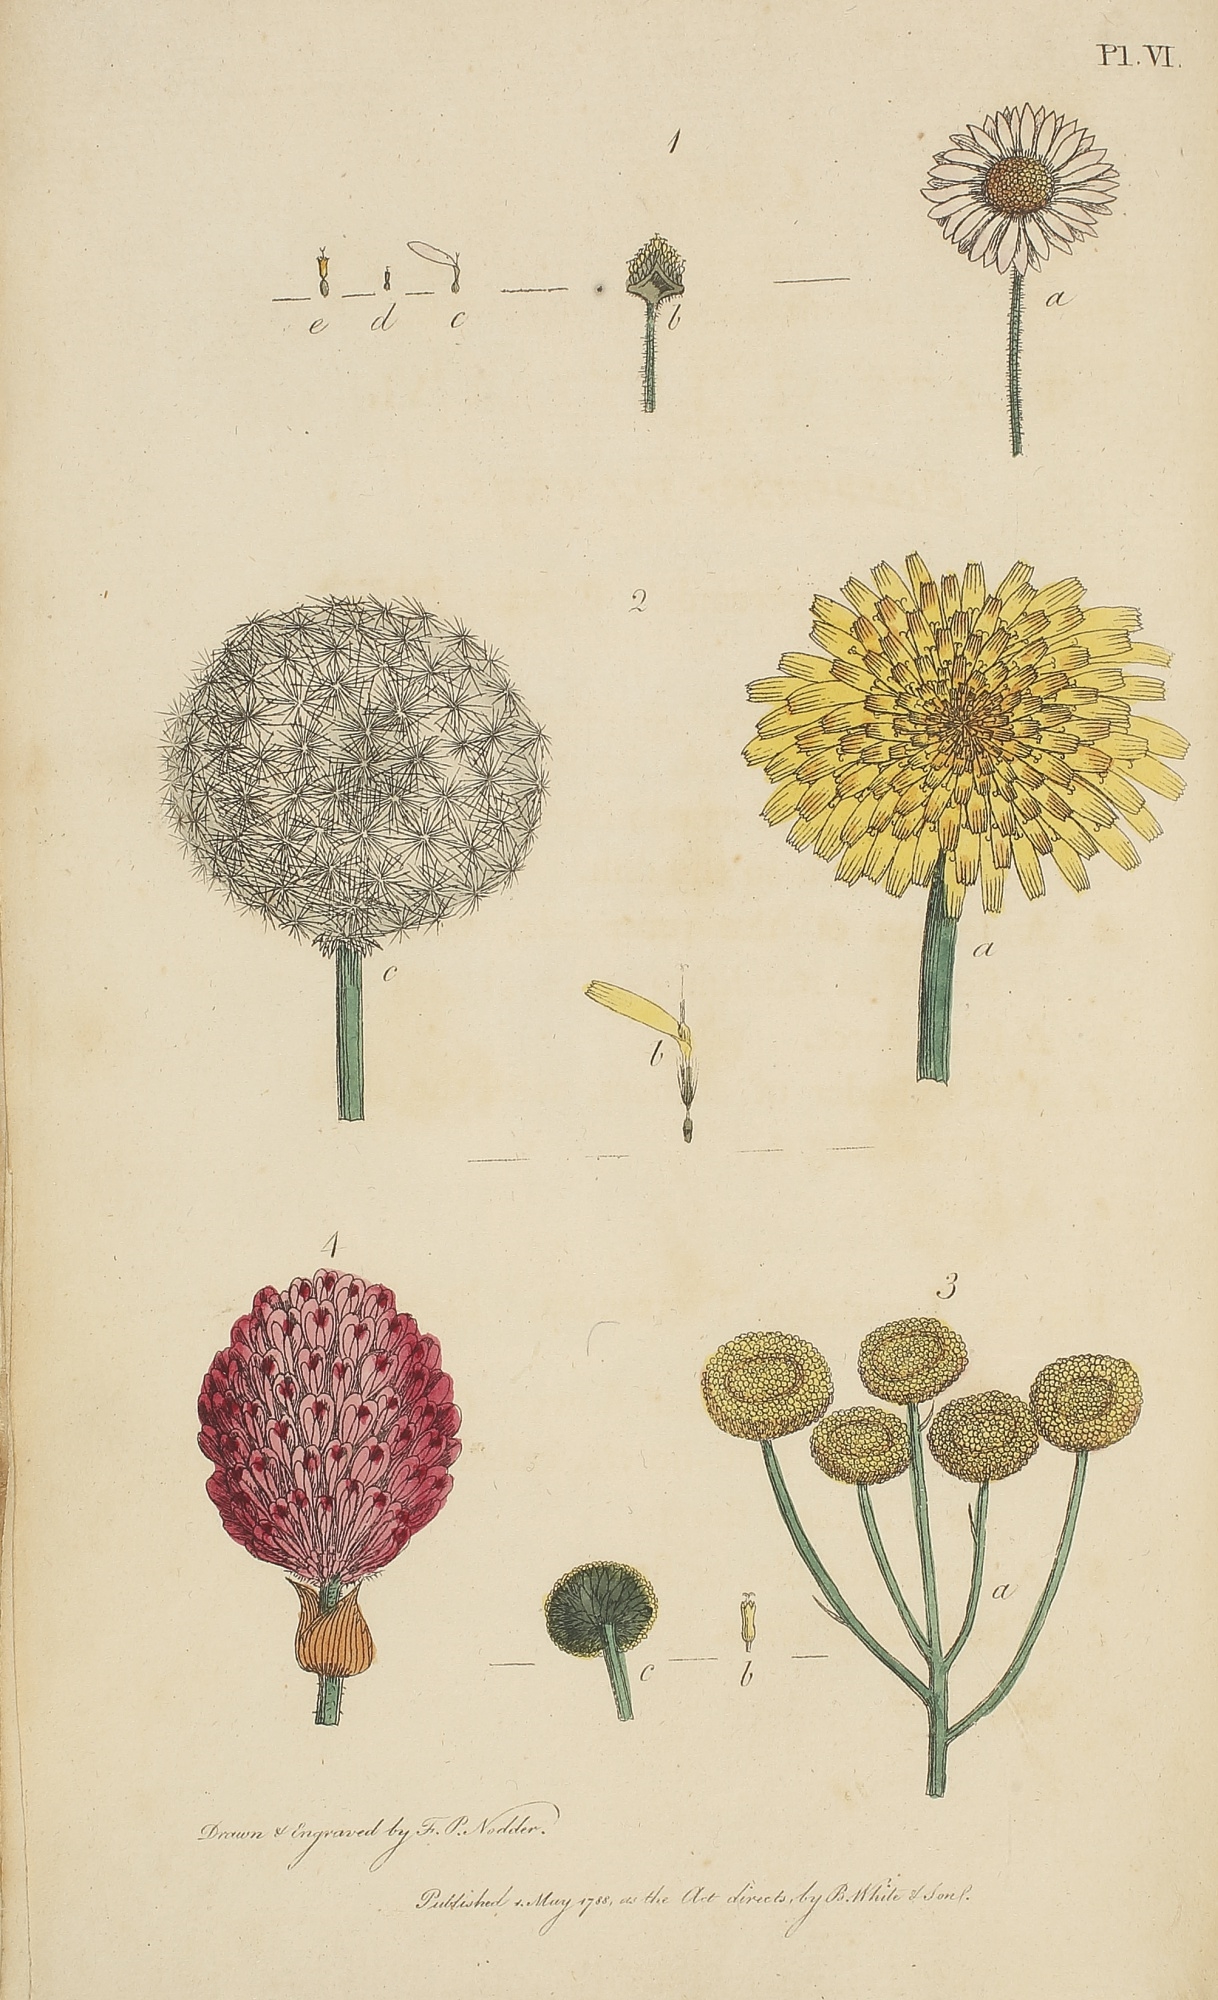 THIRTY-EIGHT PLATES WITH EXPLANATIONS; INTENDED TO ILLUSTRATE LINNÆUS'S SYSTEM OF VEGETABLES, AND PARTICULARLY ADAPTED FOR LETTERS ON THE ELEMENTS OF BOTANY by Thomas Martyn, 1794